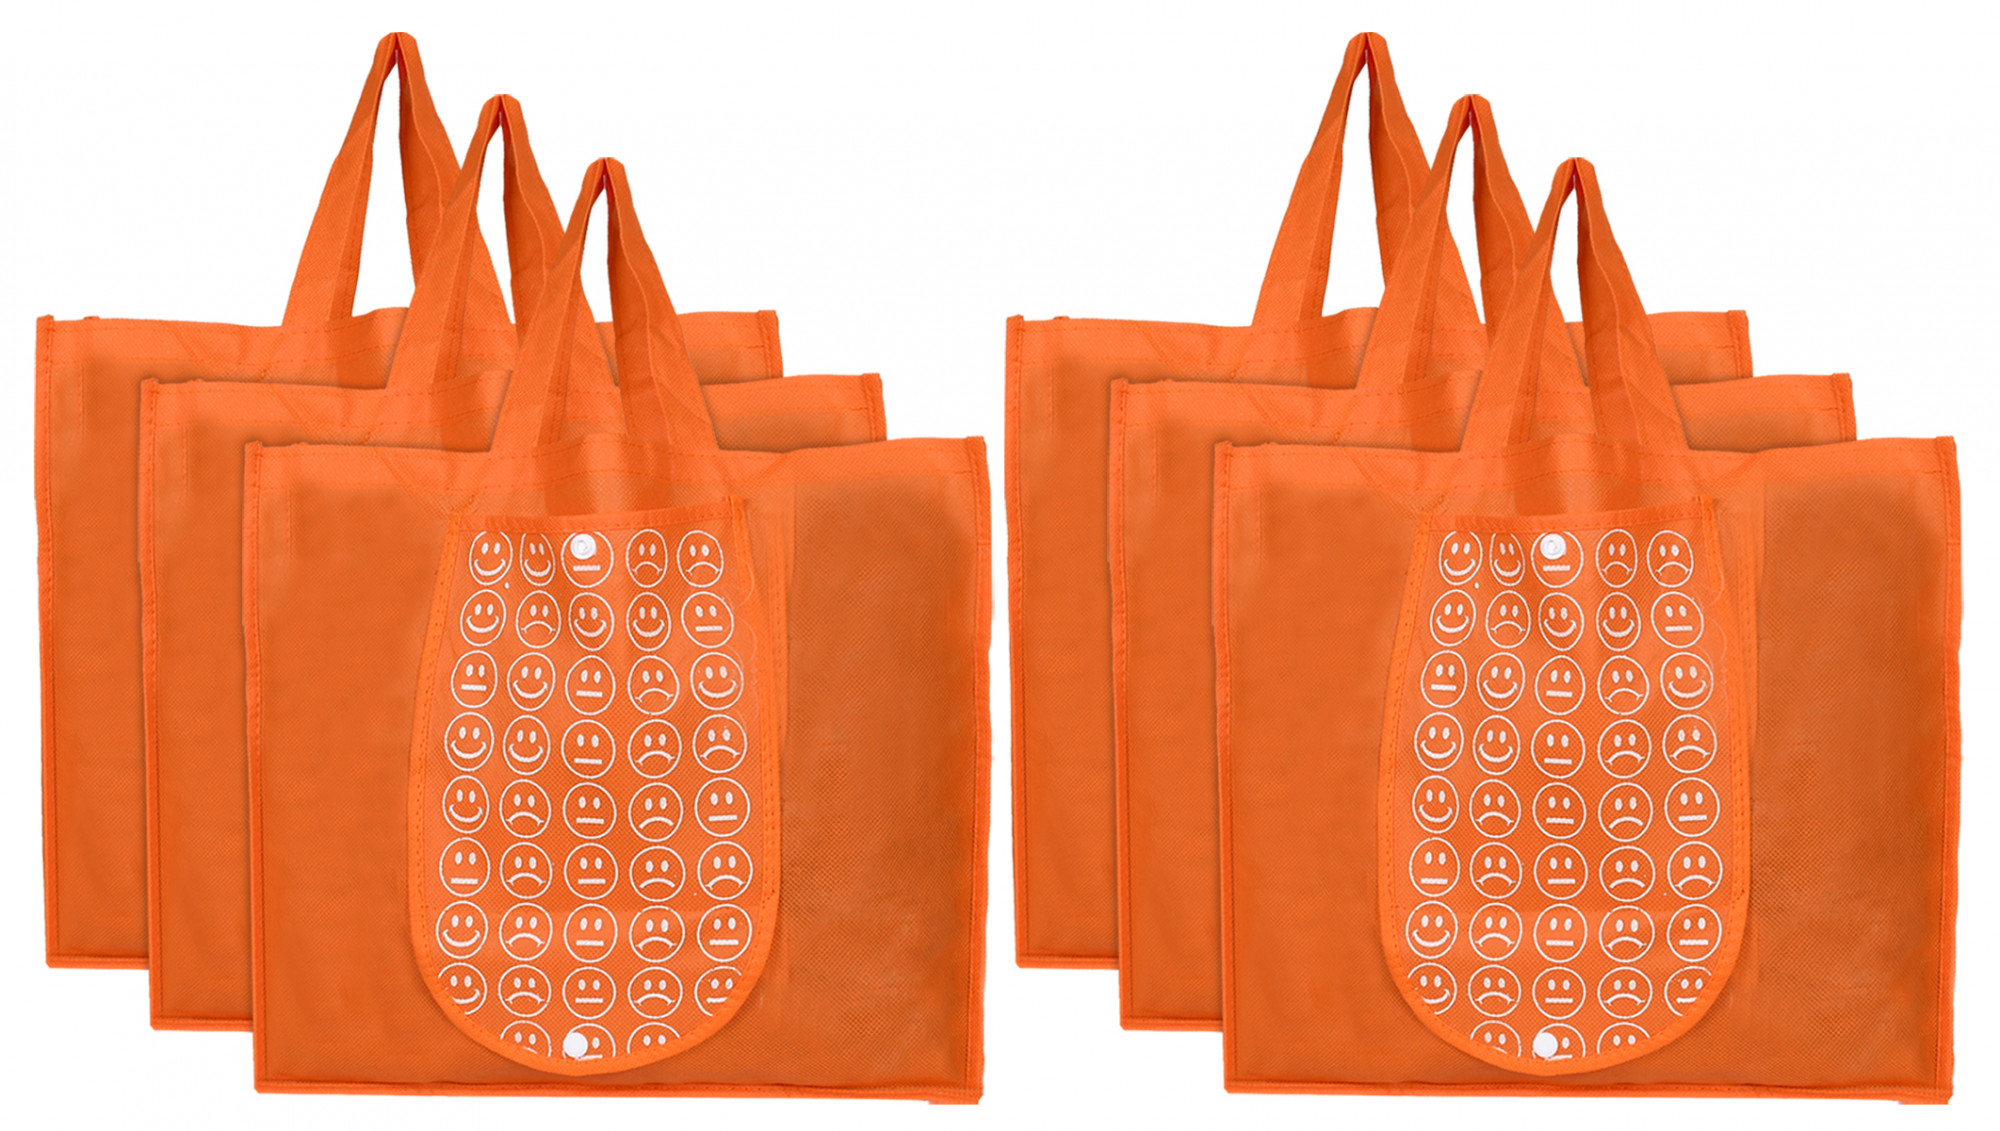 Kuber Industries Shopping Grocery Bags Foldable, Washable Grocery Tote Bag with One Small Pocket, Eco-Friendly Purse Bag Fits in Pocket Waterproof & Lightweight (Orange)